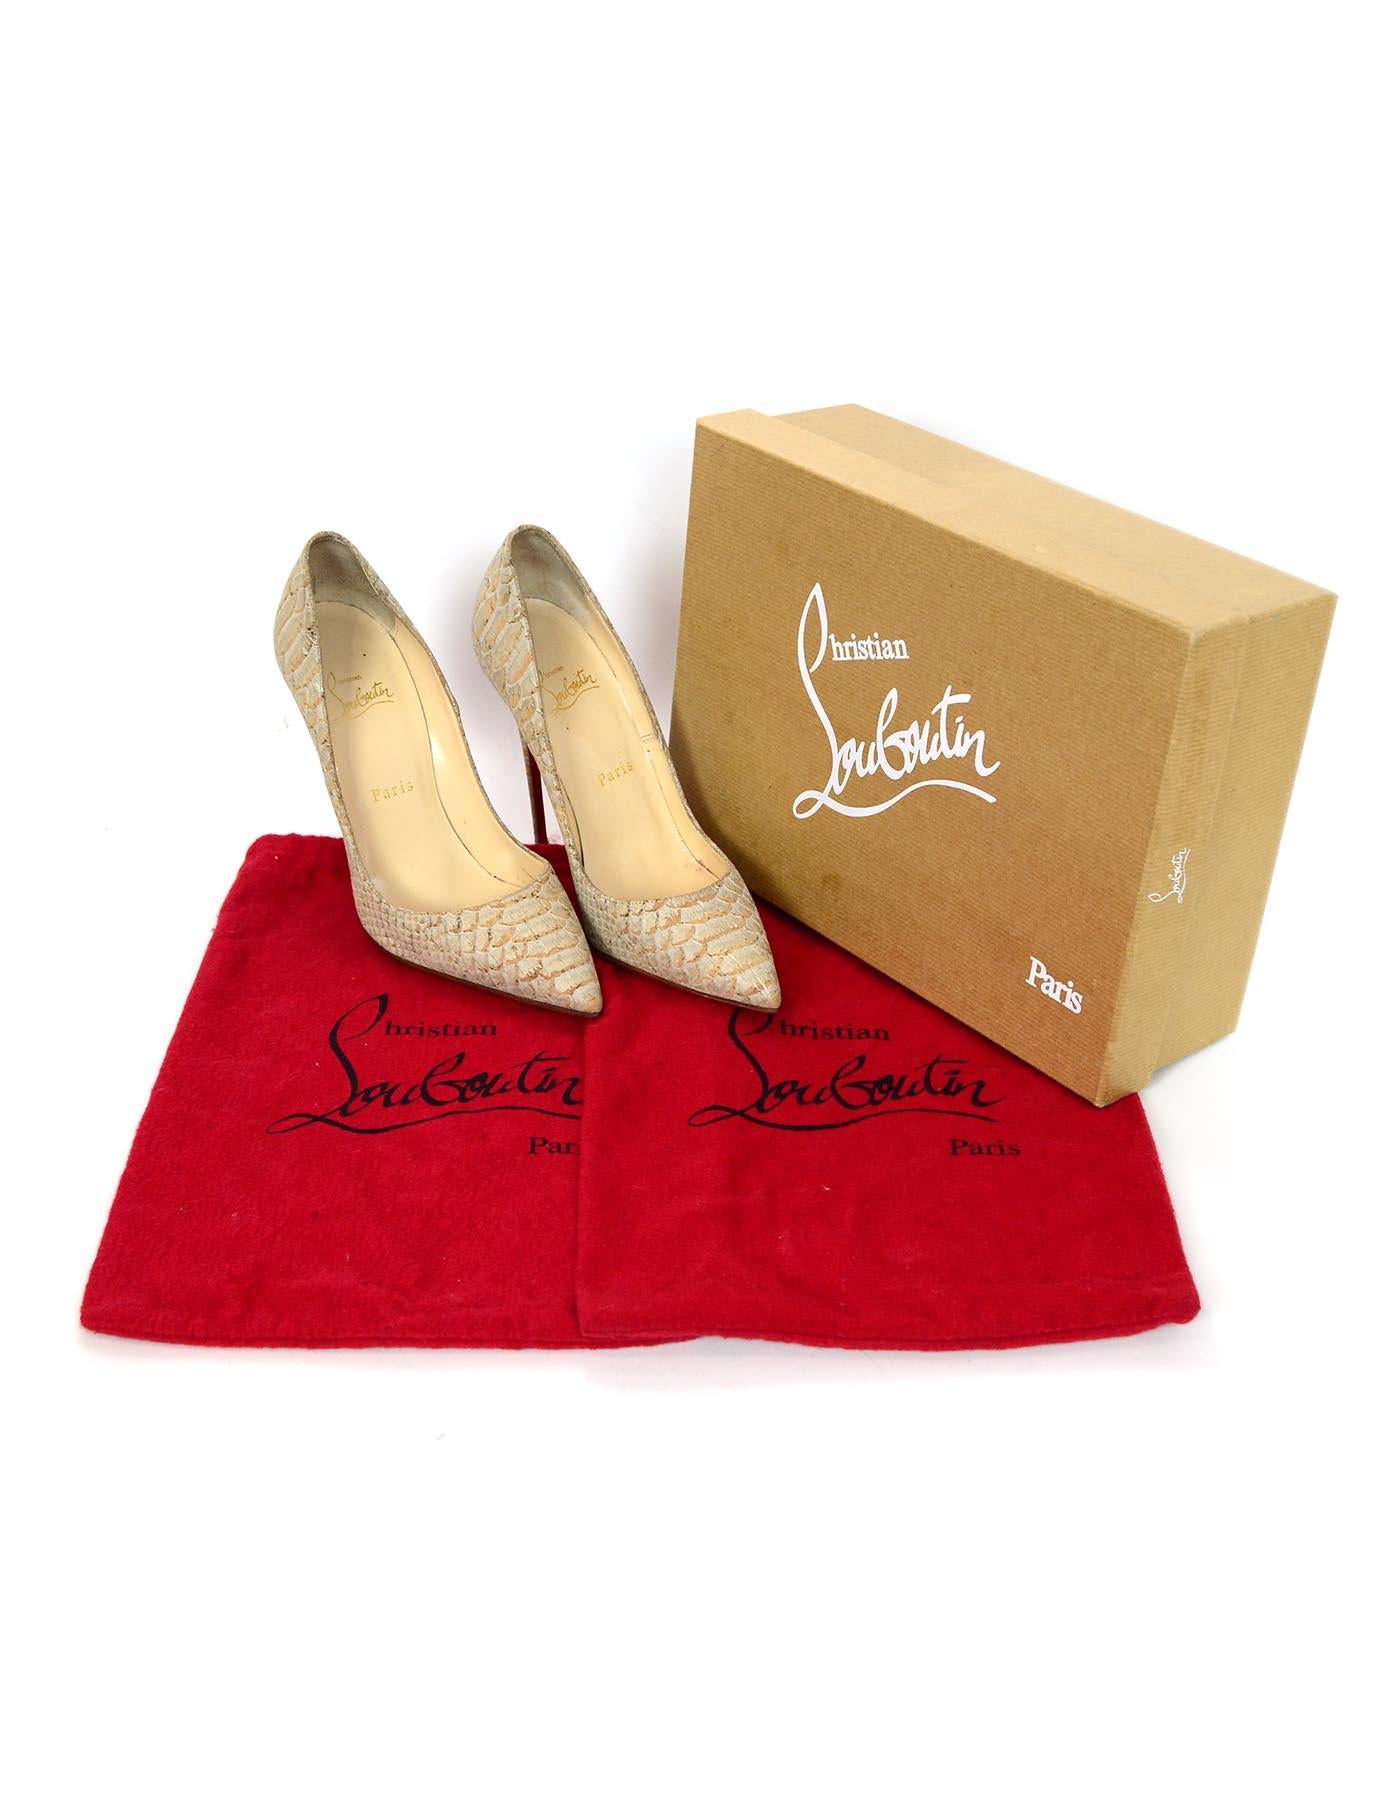 Christian Louboutin Tan Python So Kate Heels Pointed Toe Pumps Sz 38.5

Made In: Italy
Color: Tan
Materials: Python
Closure/Opening: Slide on
Overall Condition: Excellent pre-owned condition 
Includes:  Box and two dust bags

Measurements: 
Marked